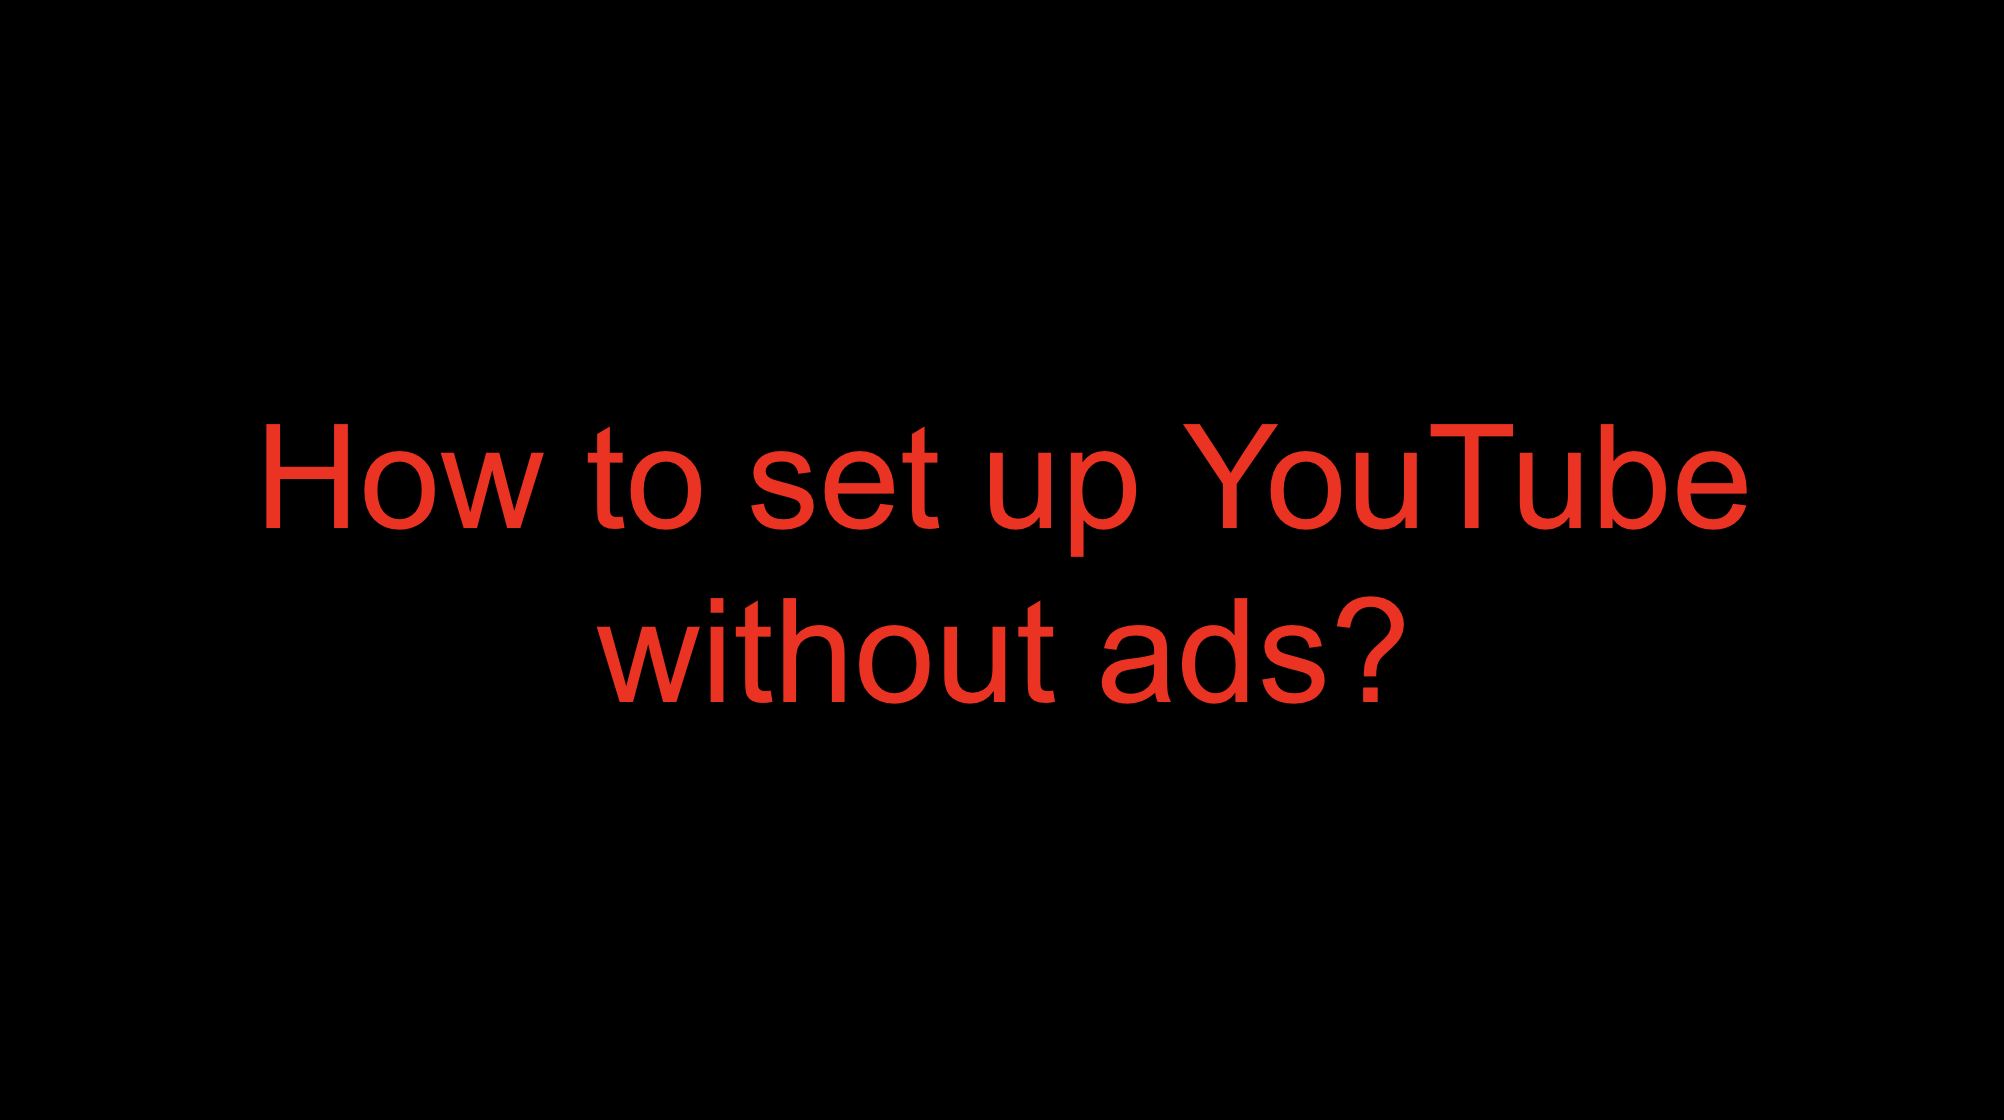 You are currently viewing How to set up YouTube without ads: Useful tips and instructions